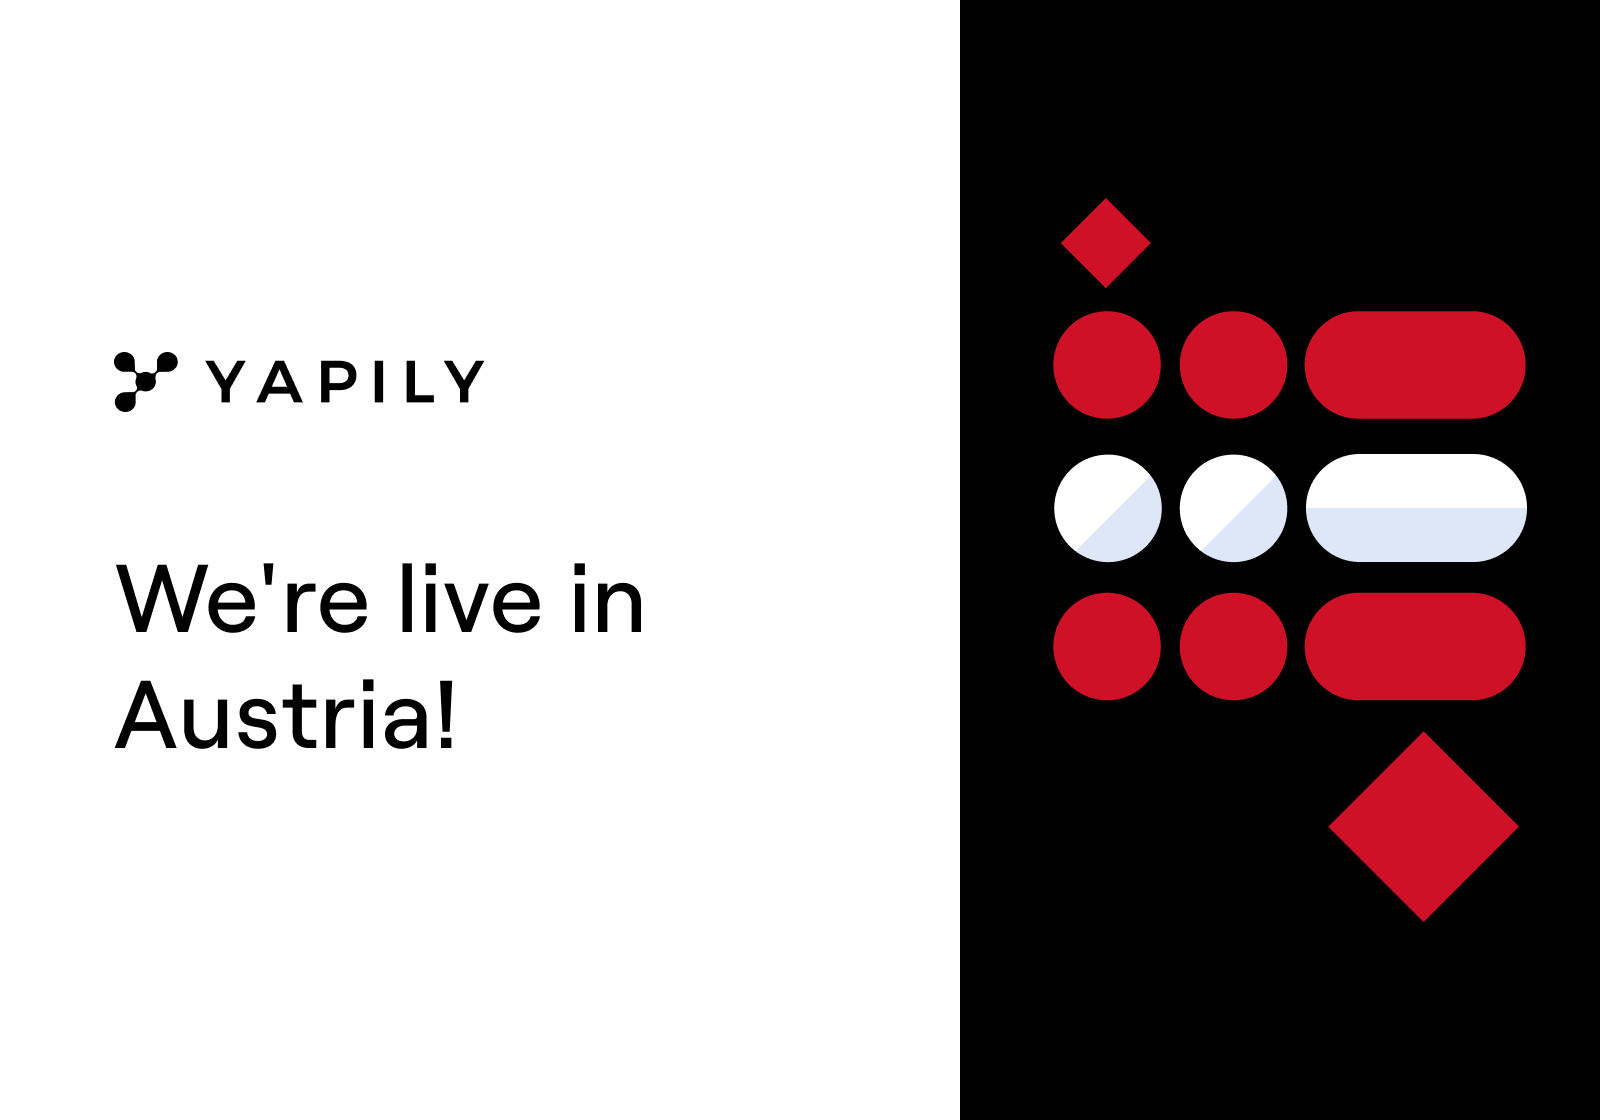 Open banking is transforming the way we do financial services, and Yapily is on a mission to provide the greatest coverage in Austria. So we’re pleased to announce that our API infrastructure is now available for local fintechs and businesses in Austria.